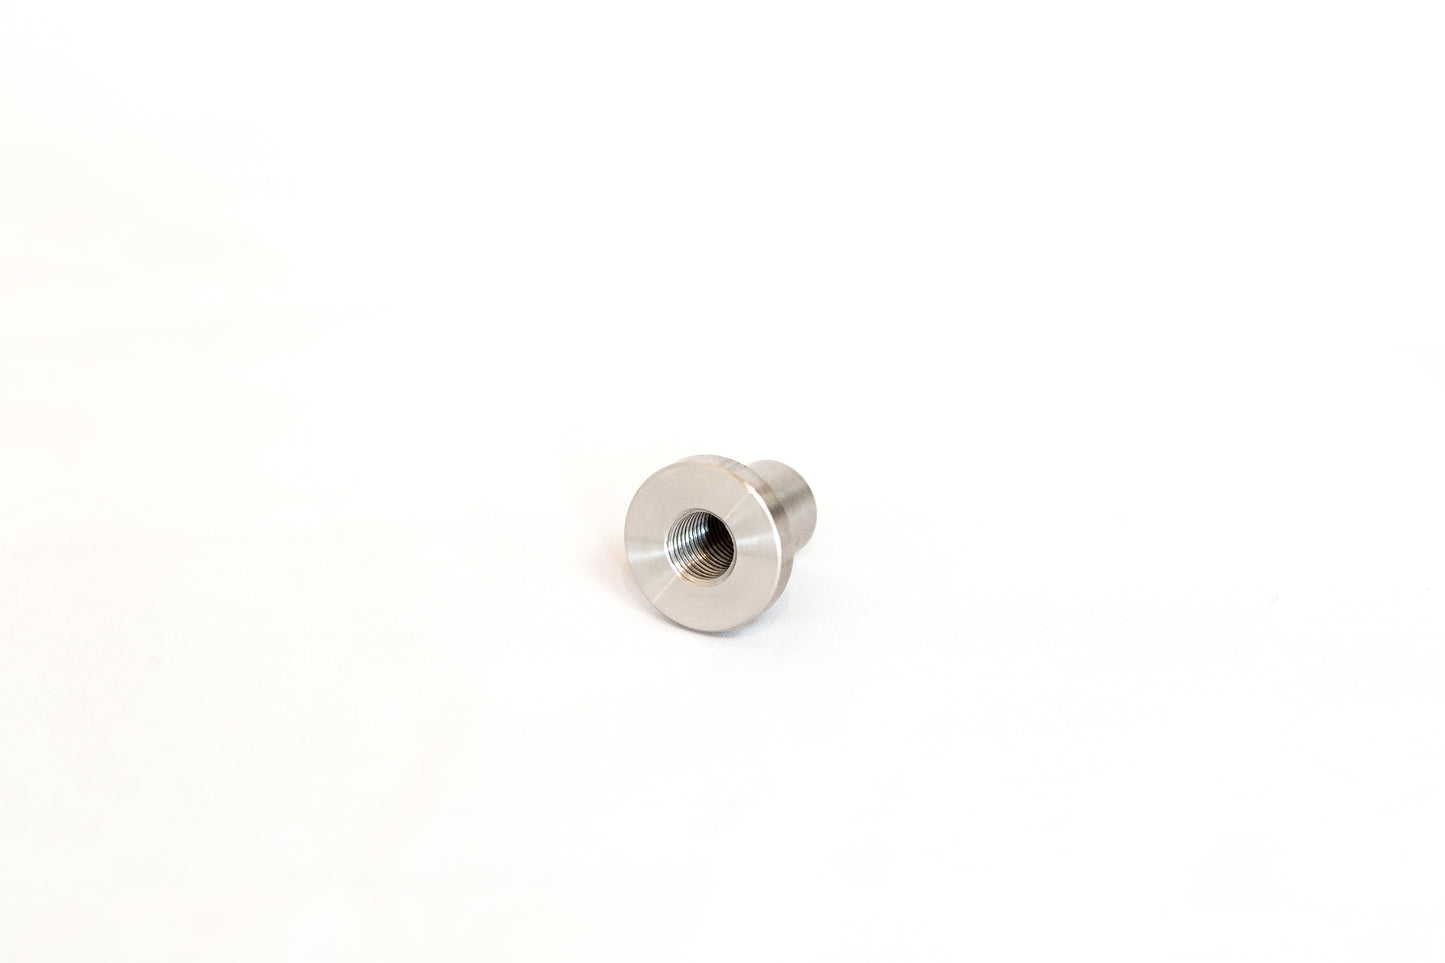 Tophat Blind Threaded 3/8 UNF Stainless